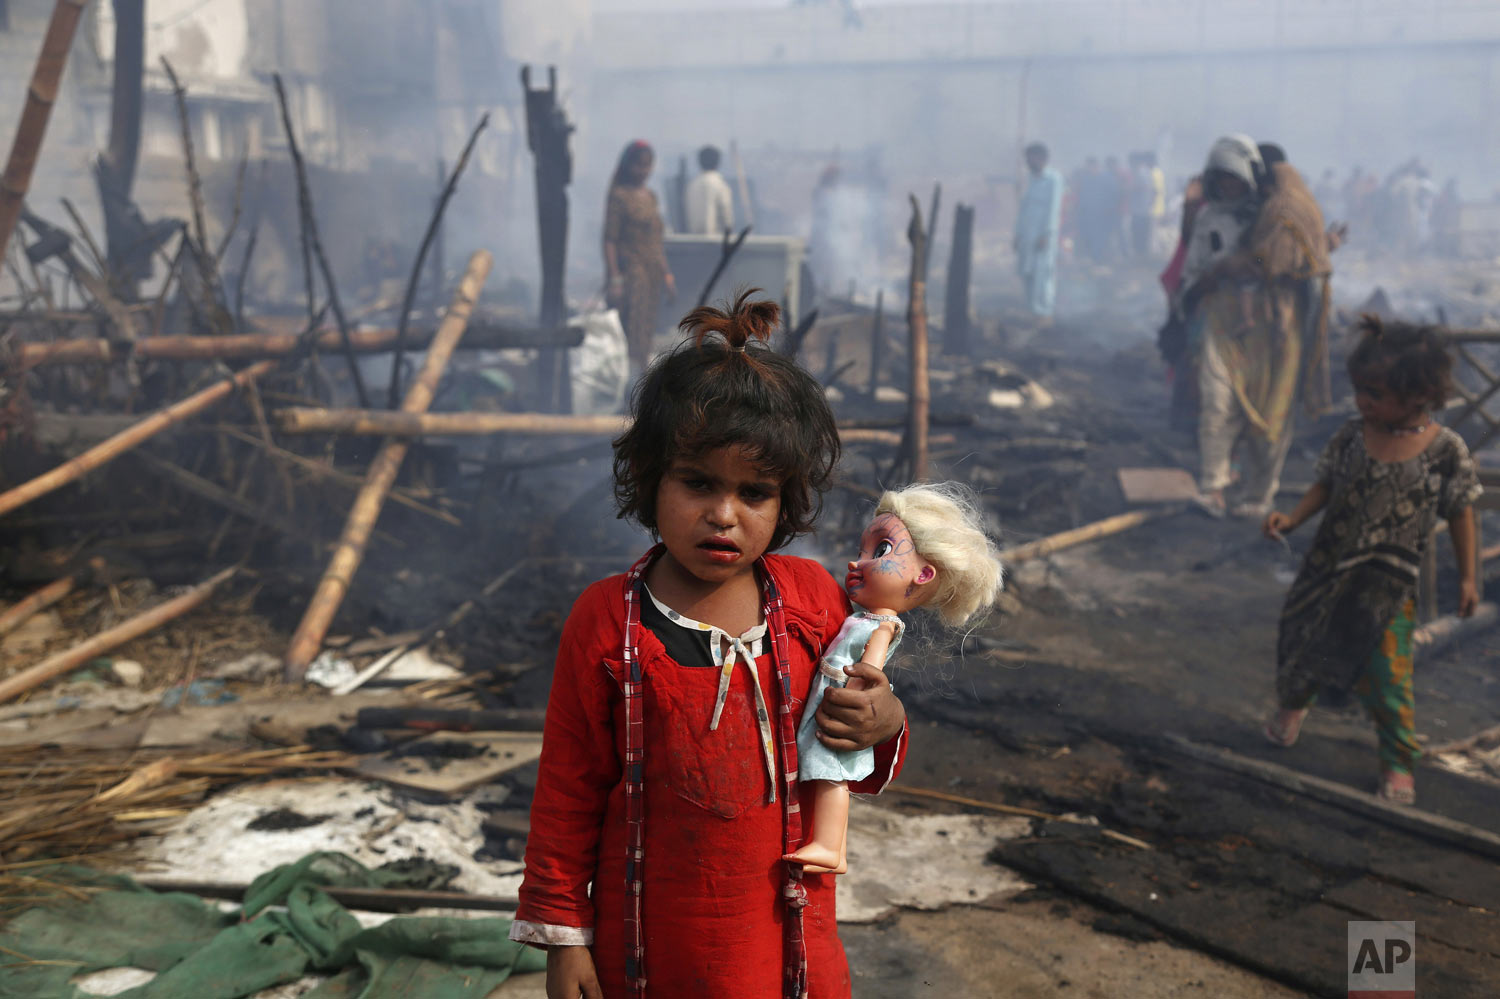  A young girl holds her doll while standing amid the ruins of her burnt home after a fire gutted the area, in Karachi, Pakistan, Sunday, Jan. 20, 2019. About 40 huts were burned to ashes as fire erupted early Sunday morning, making dozens of families